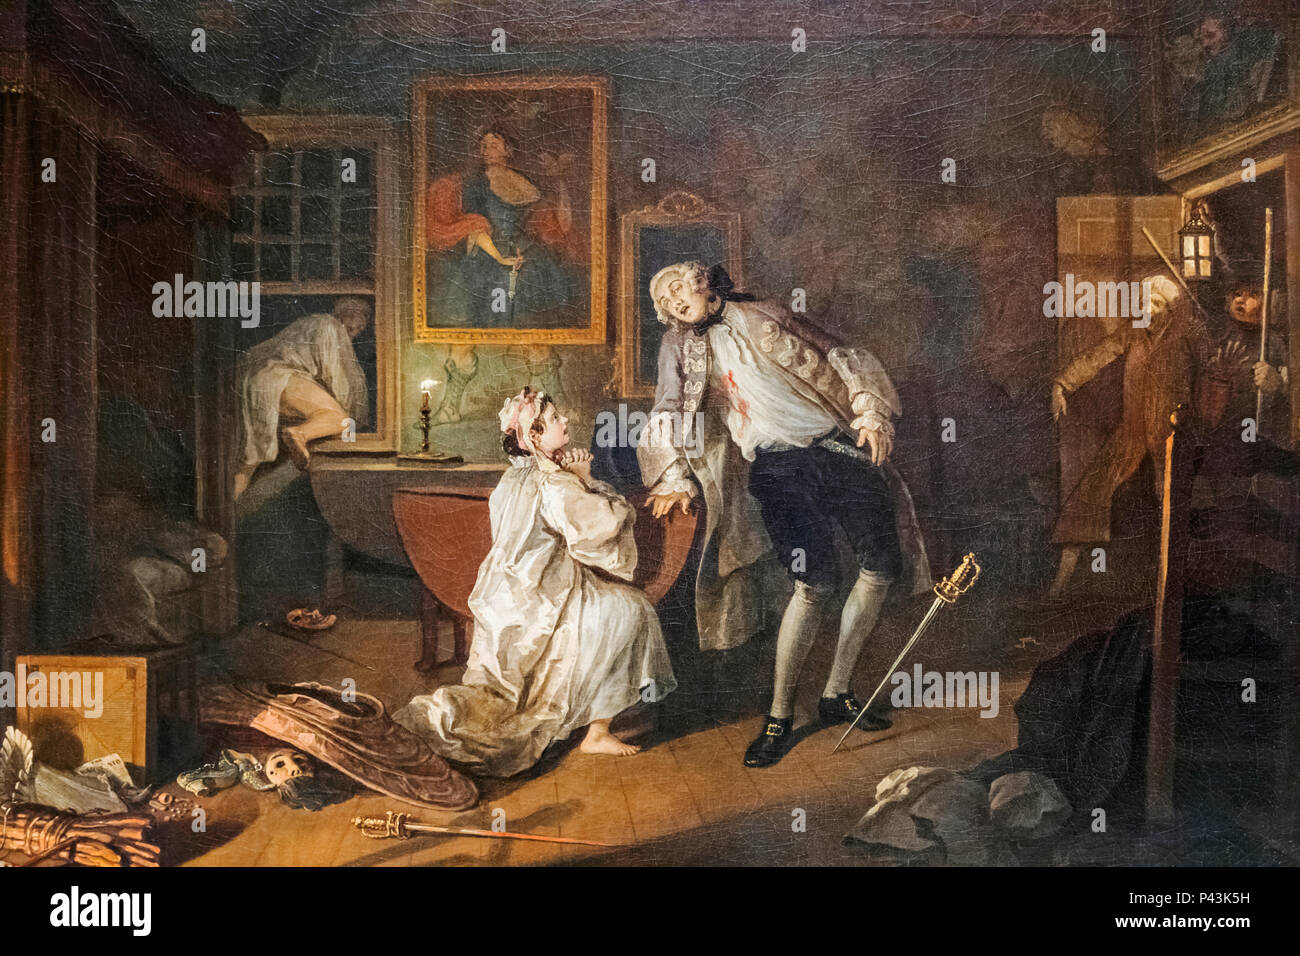 Painting from The Marriage A-la-Mode Series titled 'The Bagnio' by William Hogarth dated 1743 Stock Photo